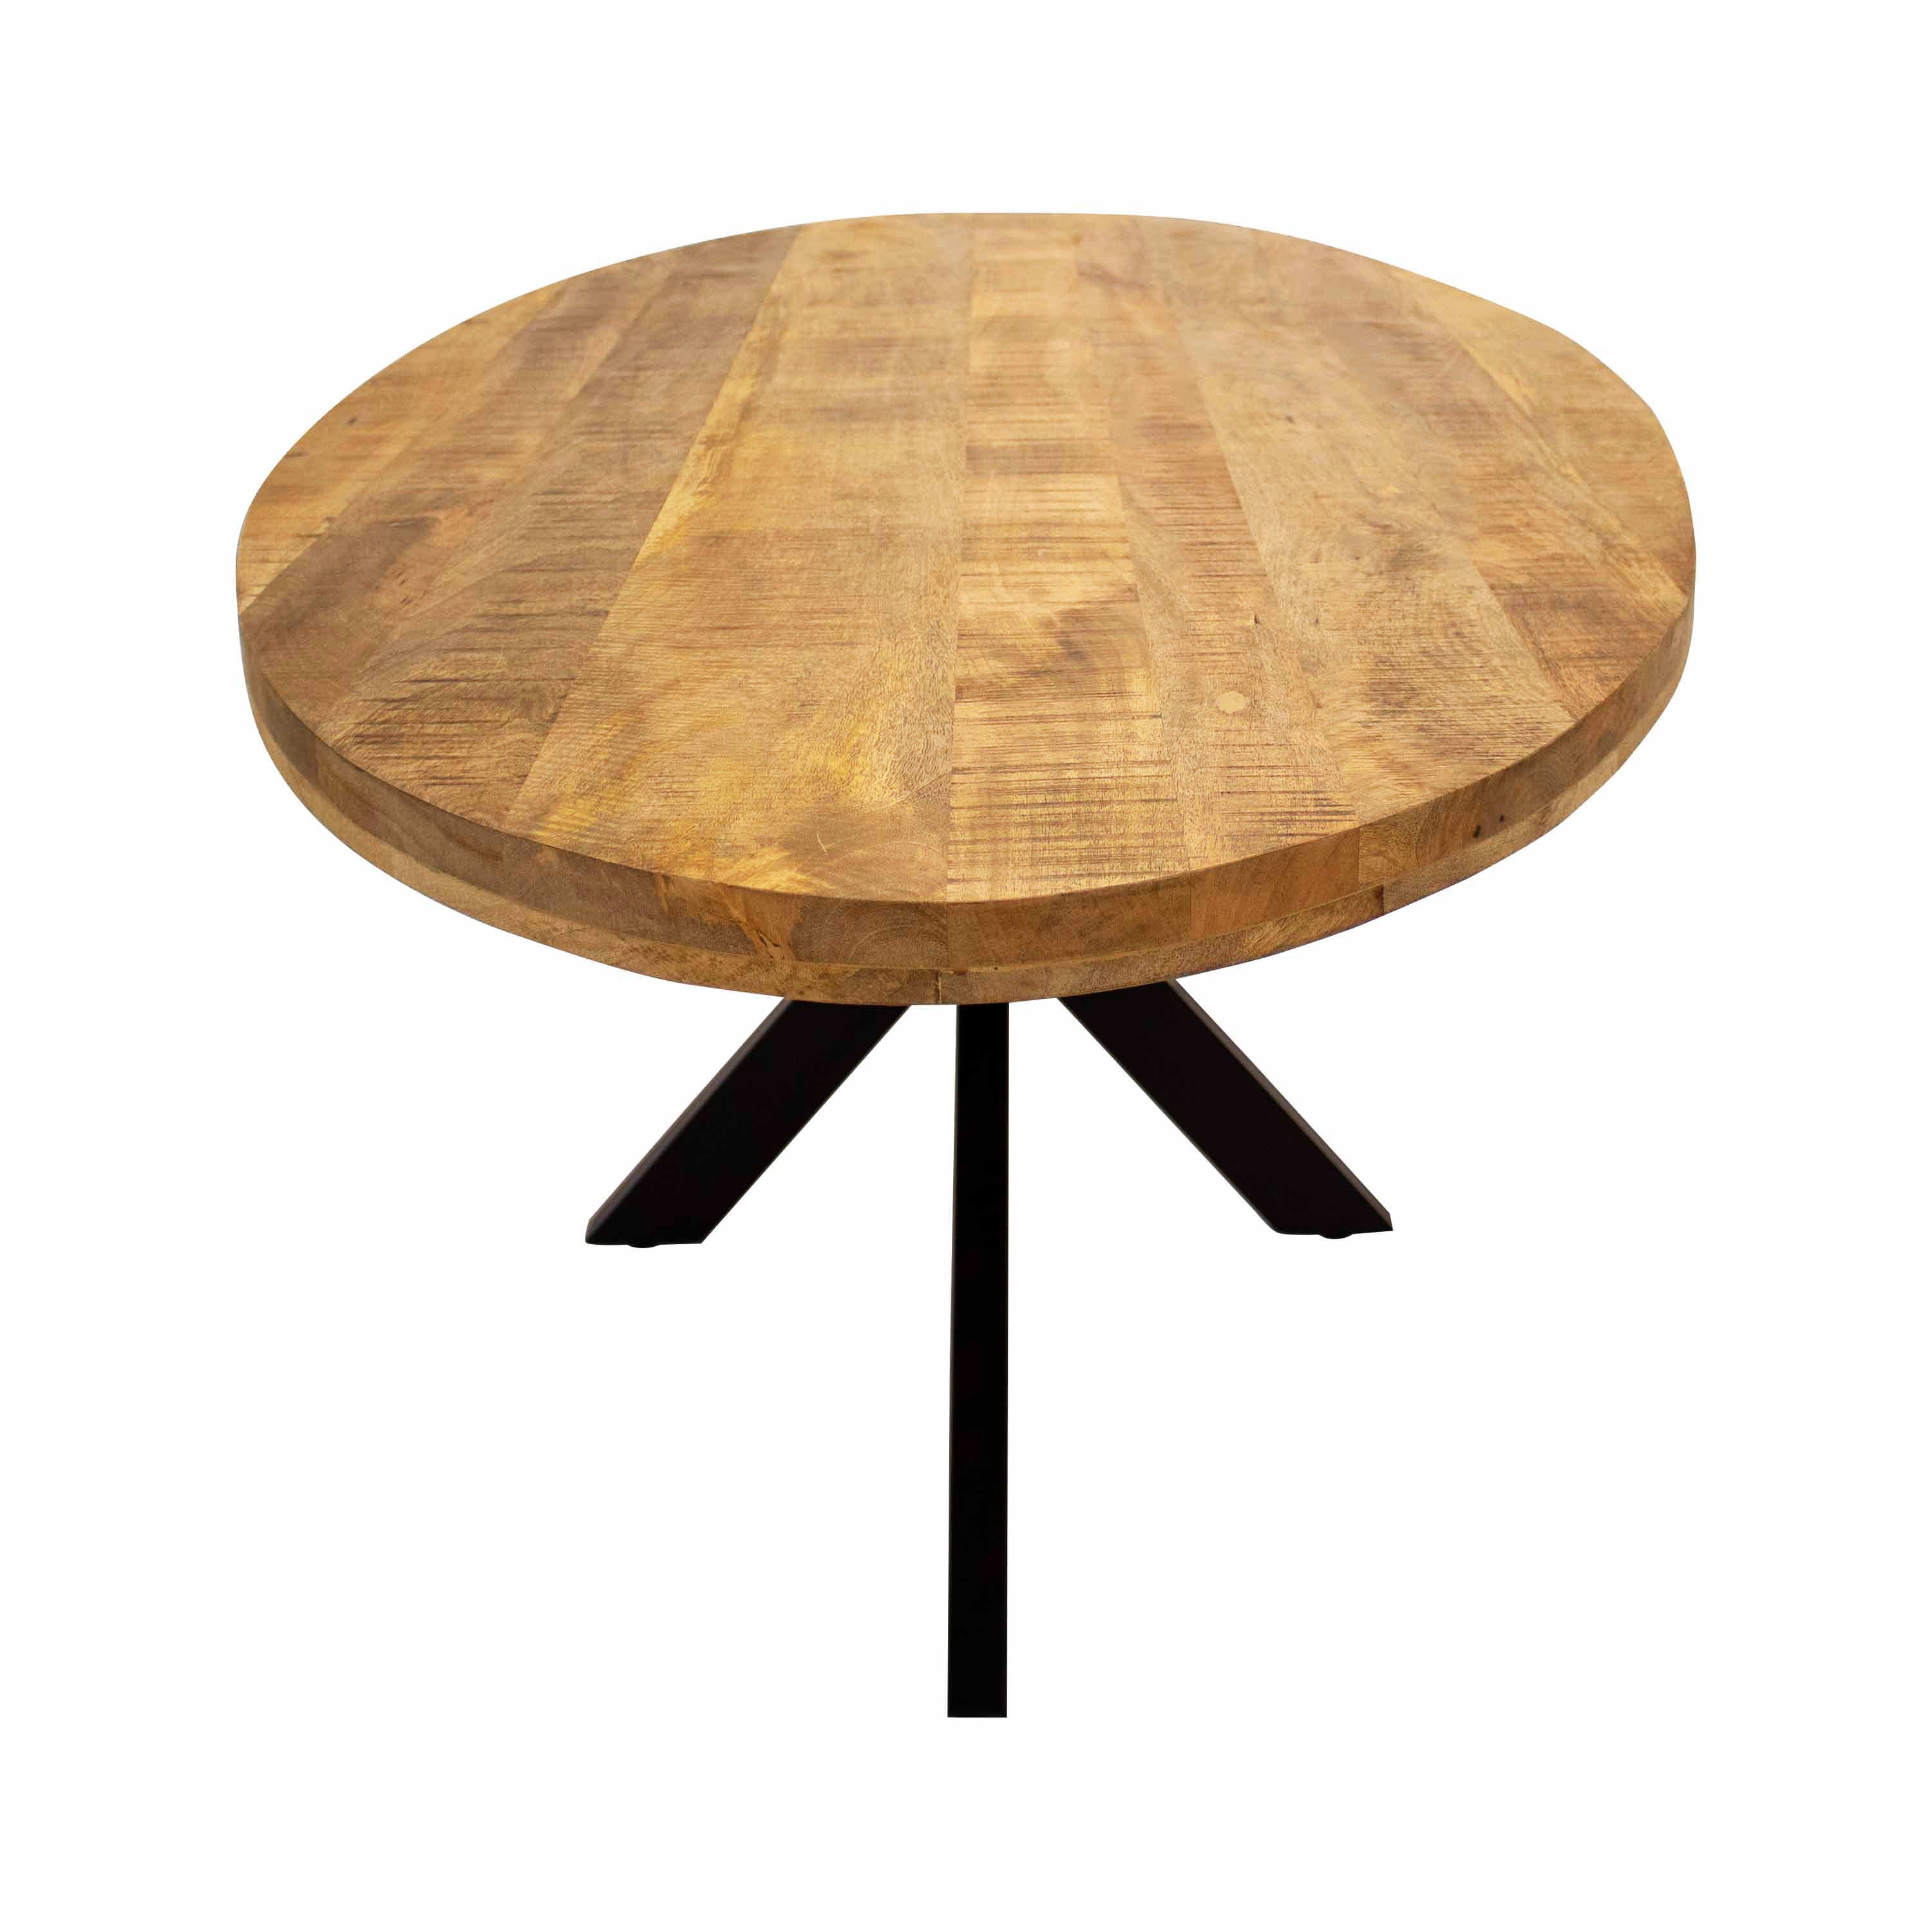 Kick dining table Dax oval - 210cm